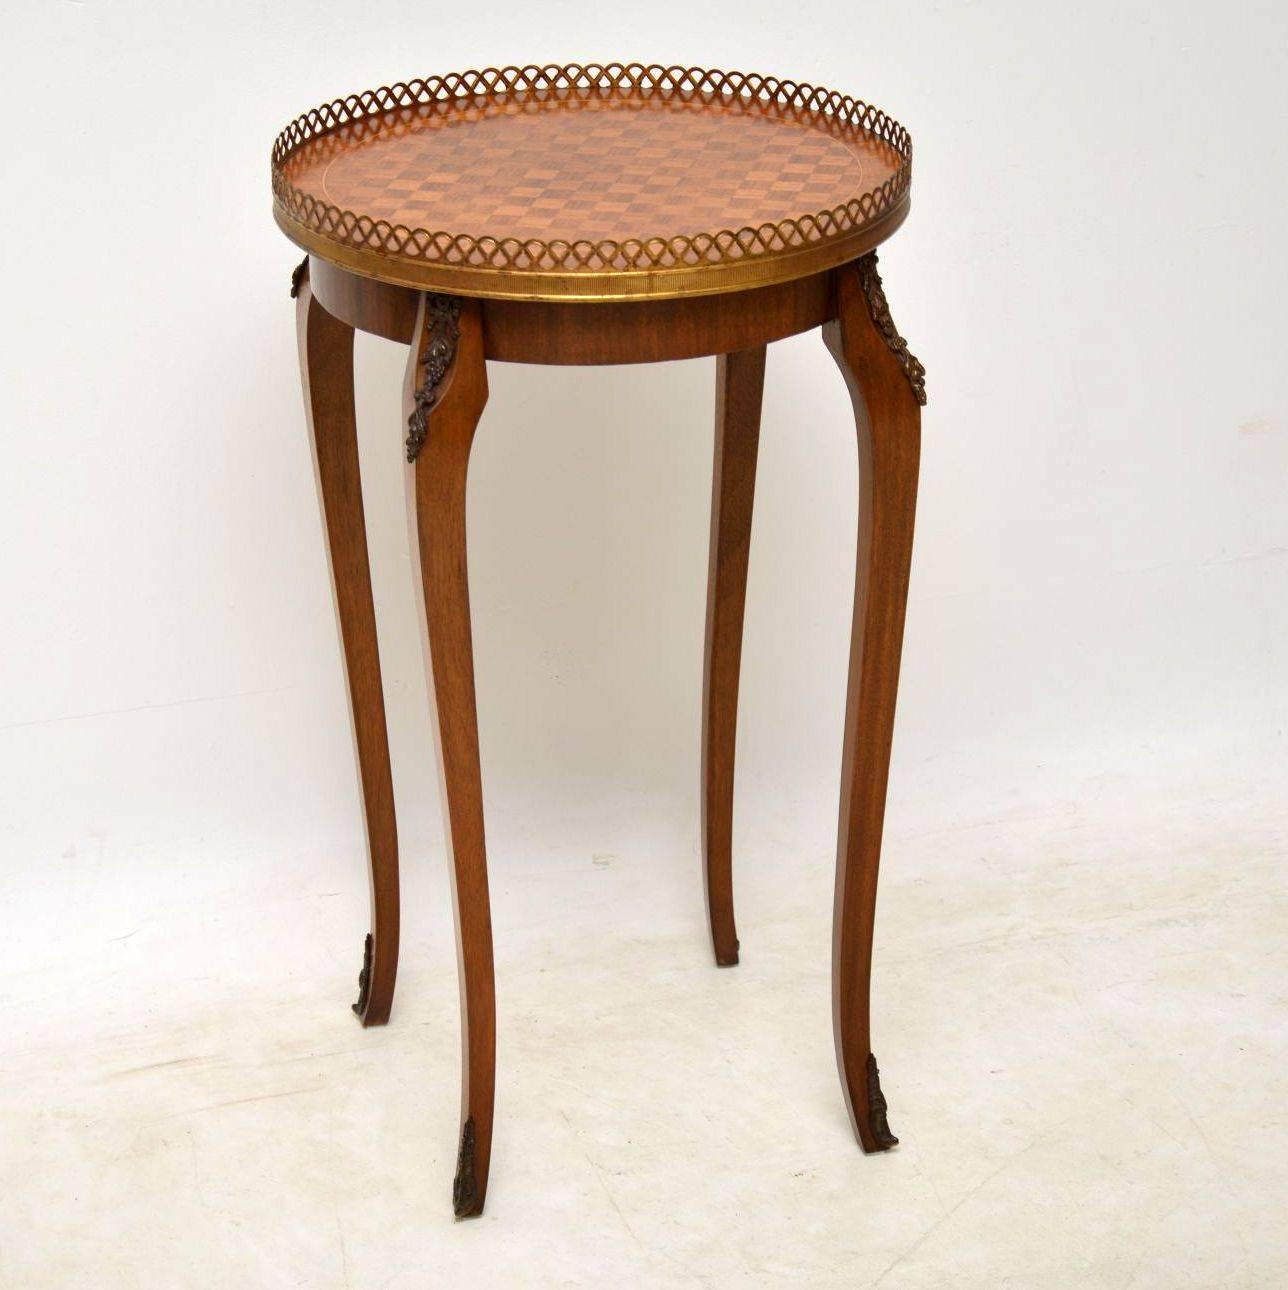 This French antique side table has a circular parquetry top with inlay and cross banding. It also has a gilt bronze pierced gallery and gilt bronze mounts. This table is in excellent condition and I would date it to around the 1910s-1920s